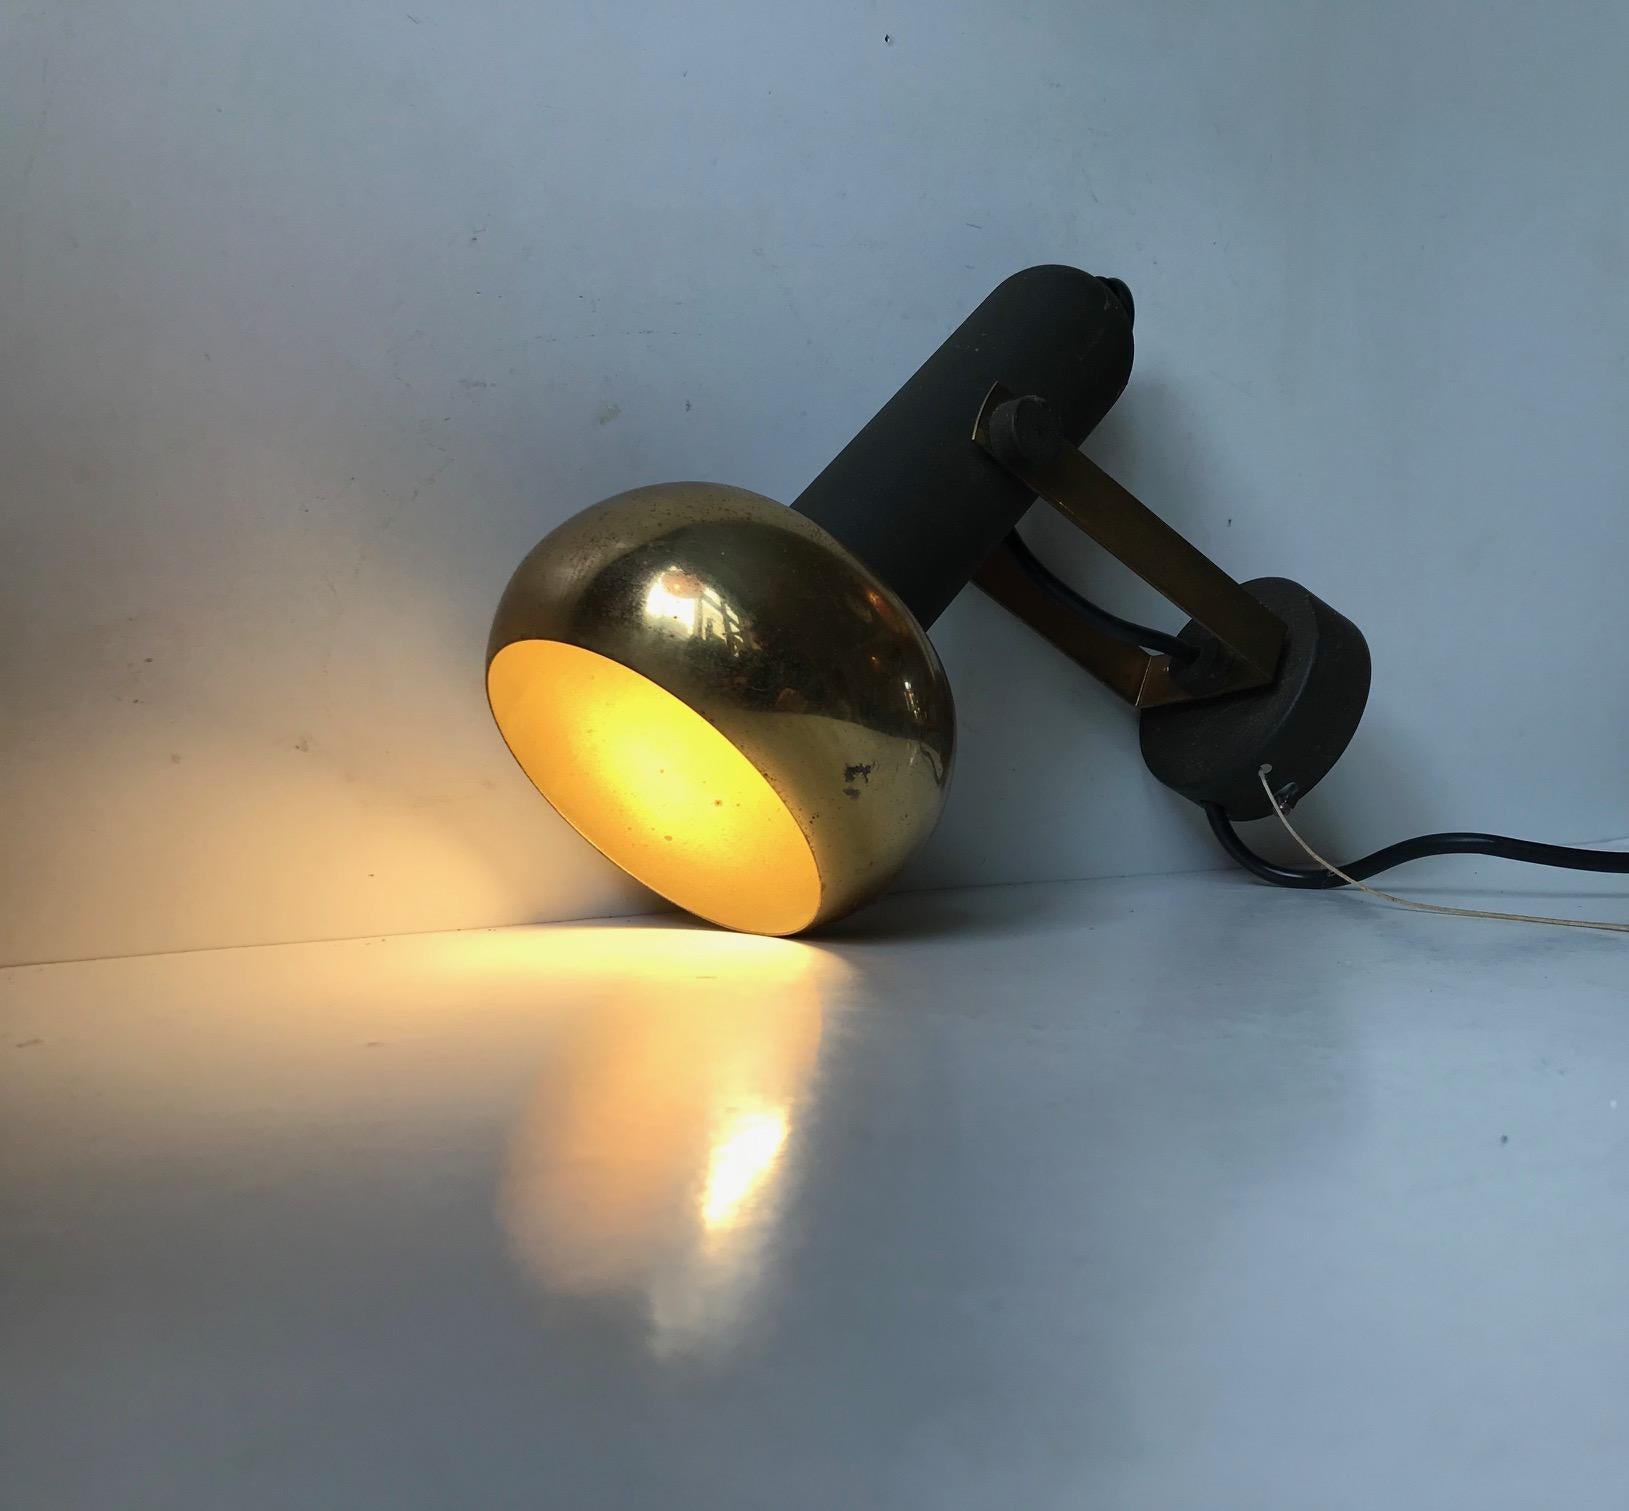 Fully adjustable sconce in brass. Designed and manufactured by Simon & Schelle - Sische in Germany during the 1960s. It features its original porcelain socket and on/of pull string.